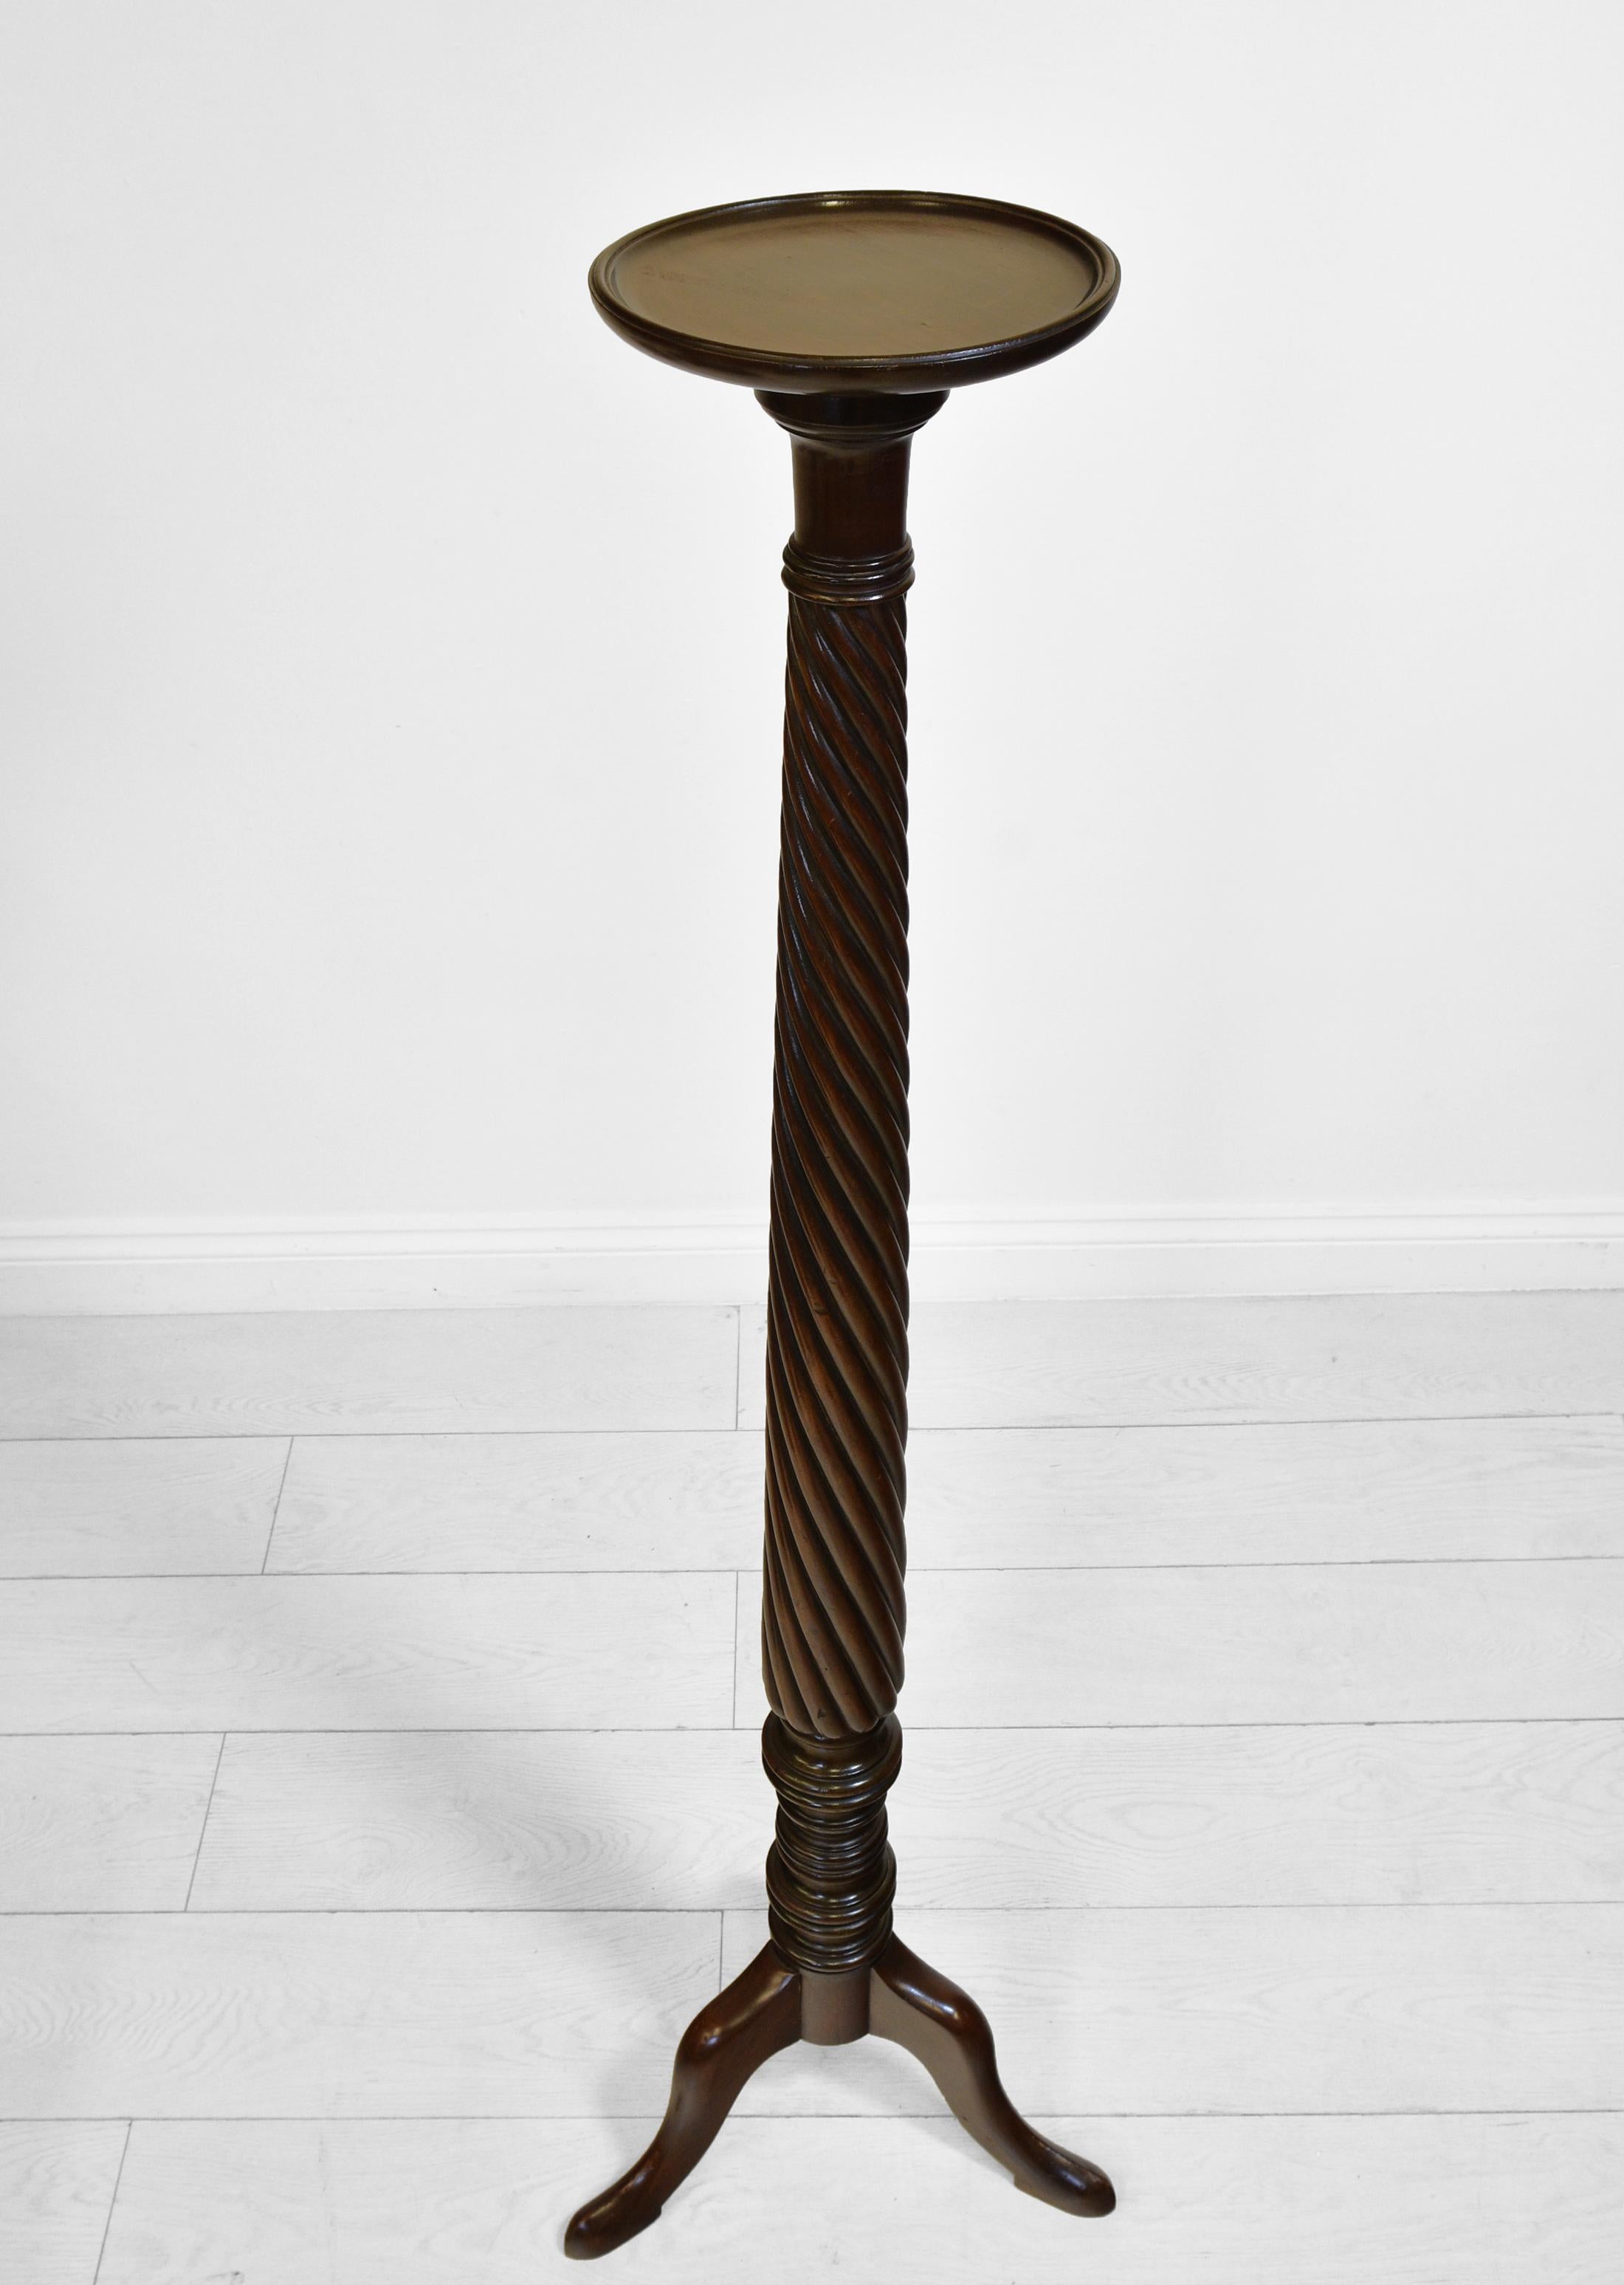 An early 20th century tall Honduran mahogany torchere with spiral turned support, and tripod legs. Circa 1910.

The torchere has been cleaned and waxed and it is in very good condition, structurally very solid with no loose joints or damage. There